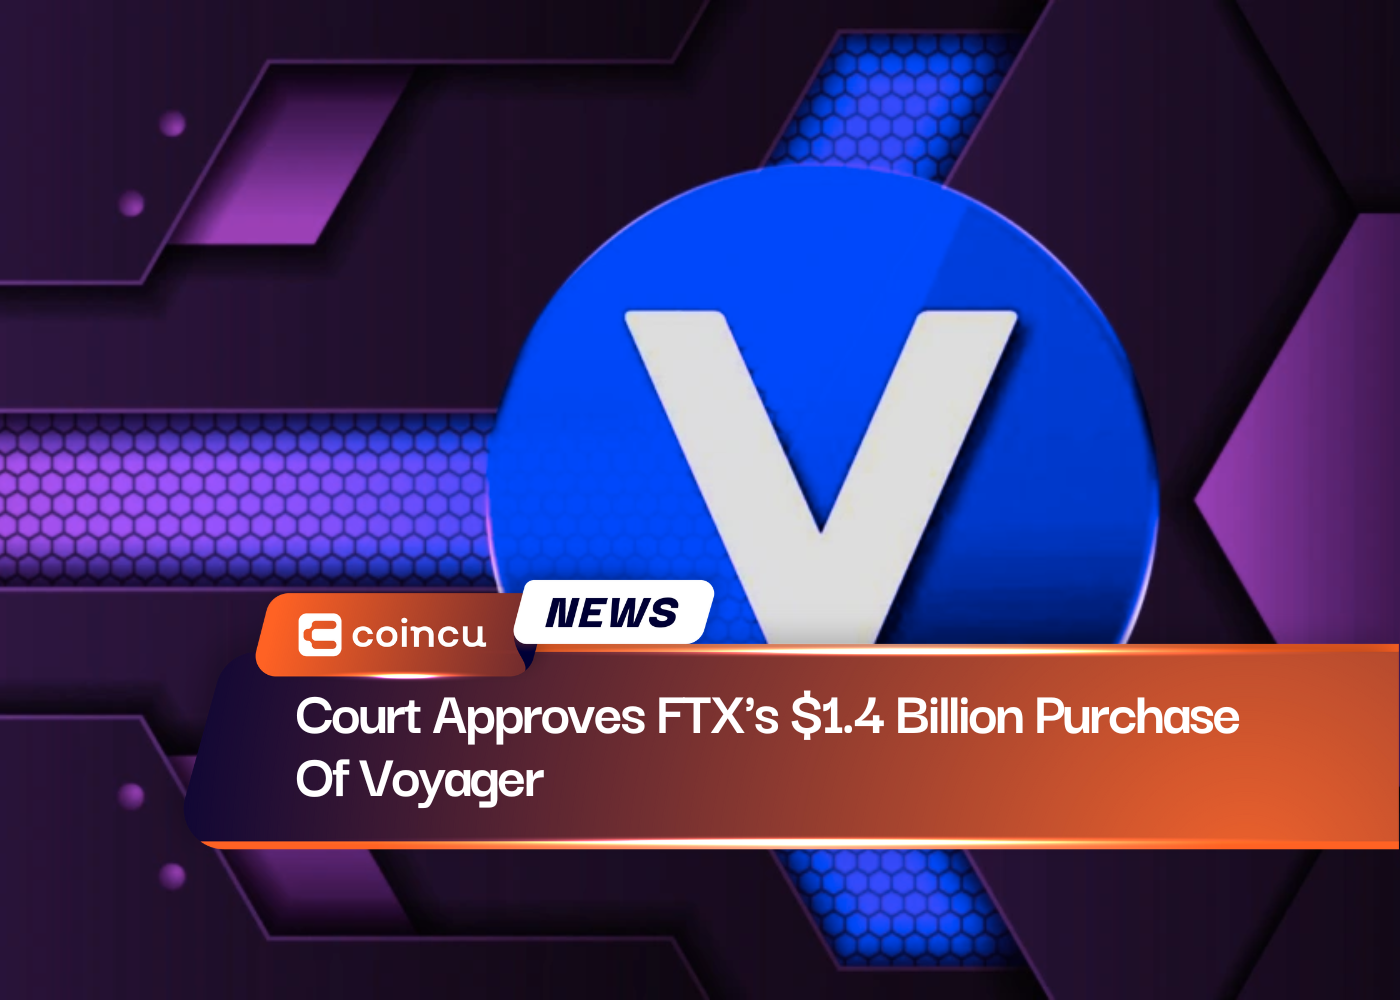 Court Approves FTX's $1.4 Billion Purchase Of Voyager